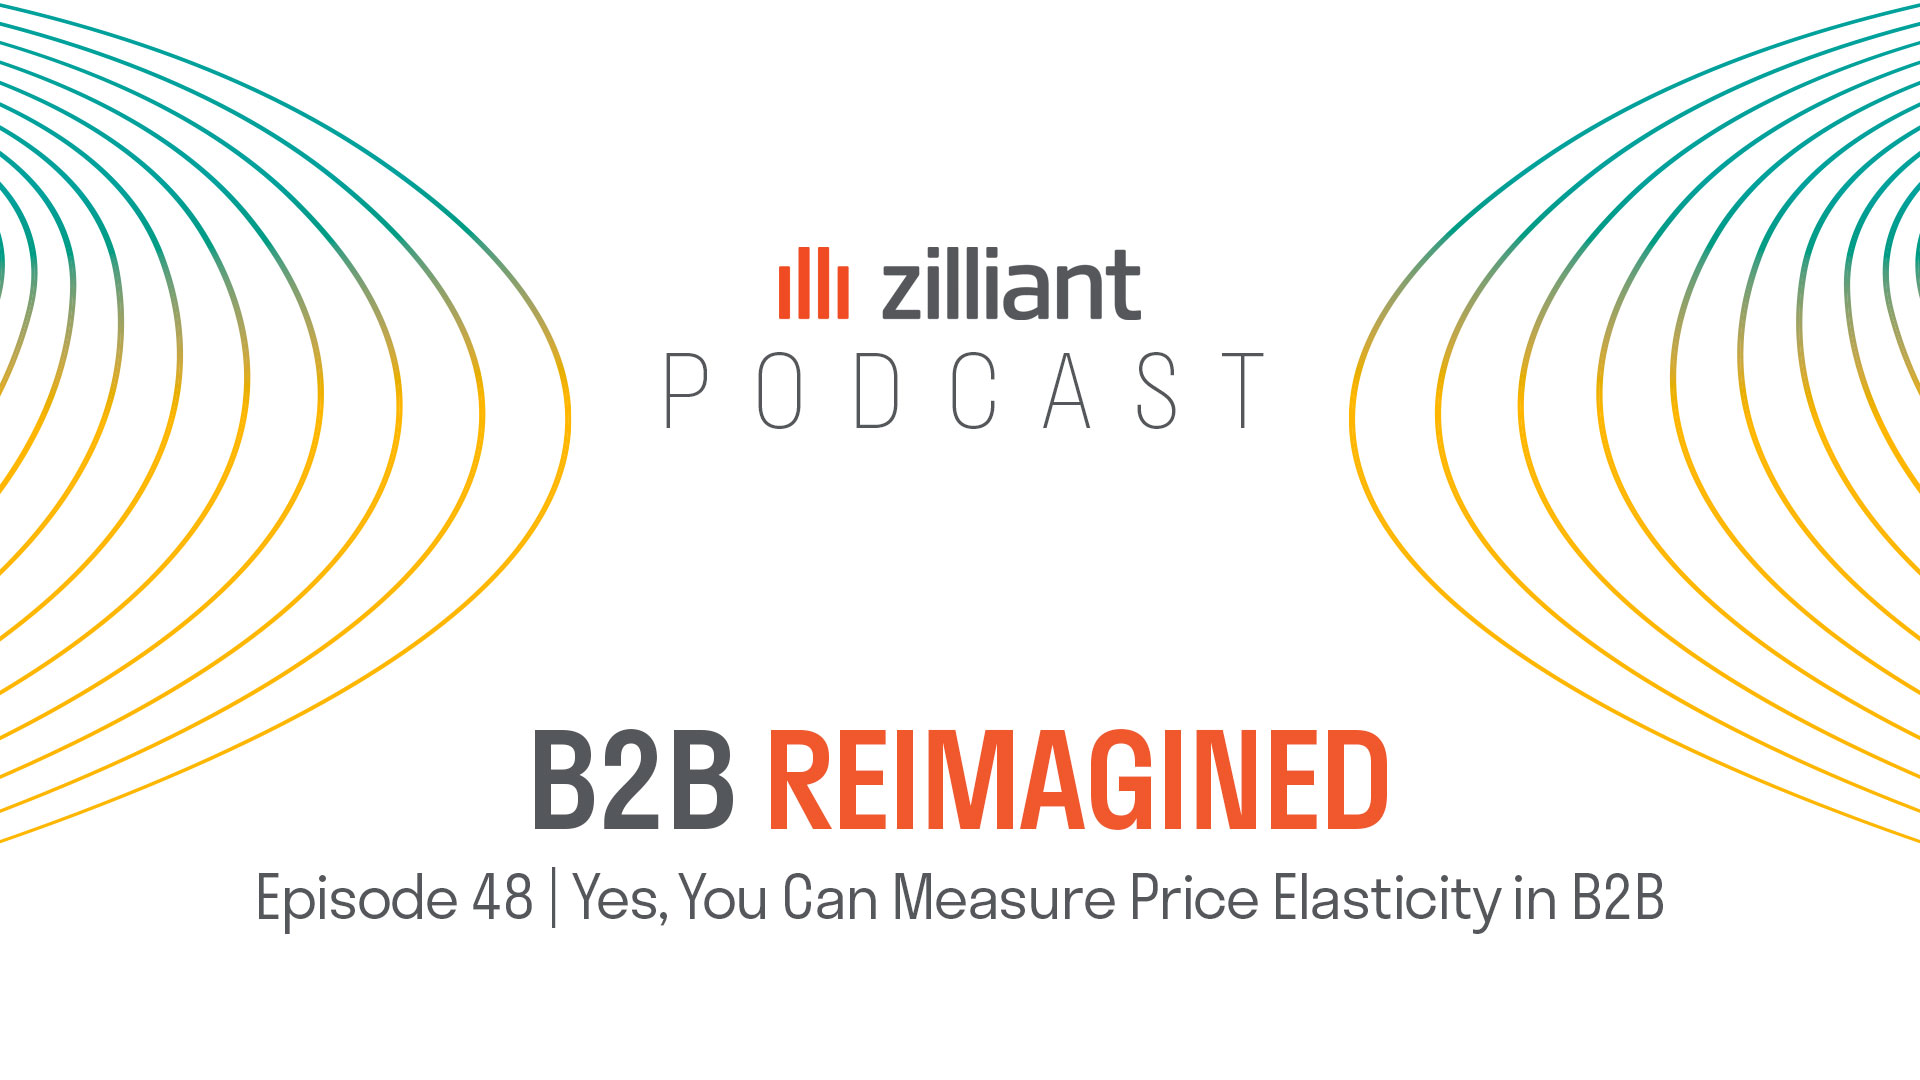 Yes, You Can Measure Price Elasticity in B2B